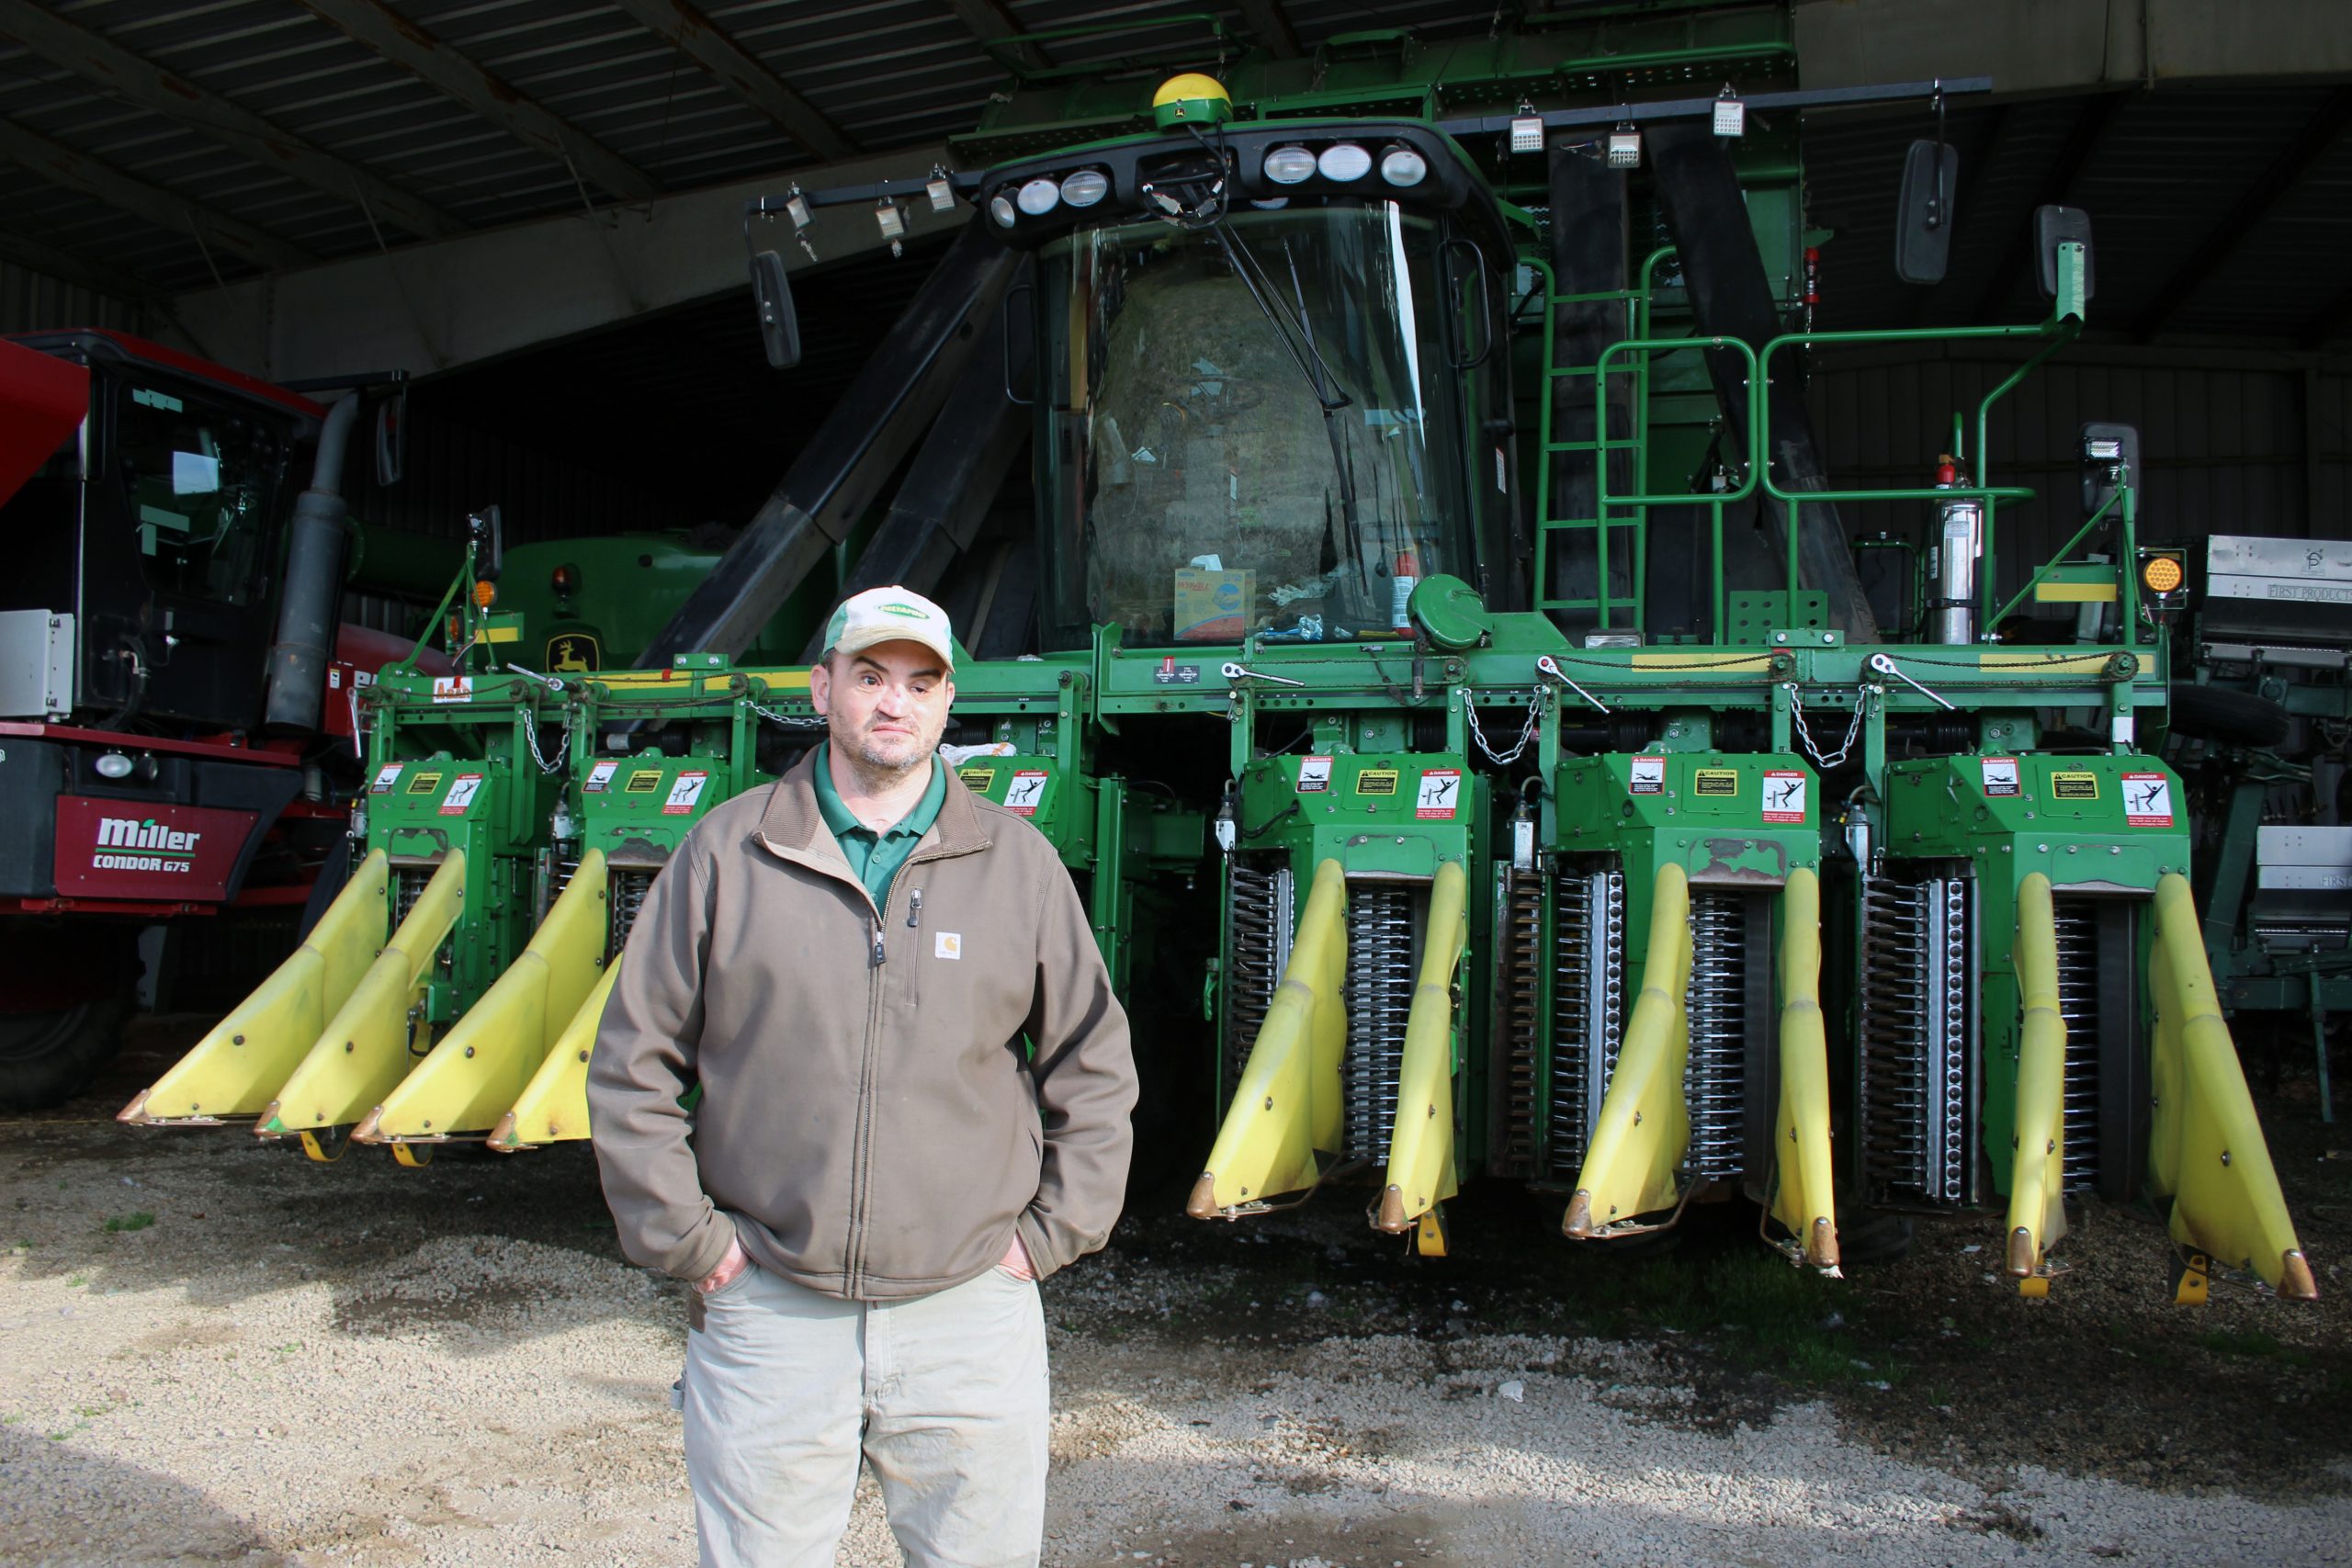 Jonathan Evans poses in front of the cotton picker. (Journal photo by Lacey Vilhauer.)